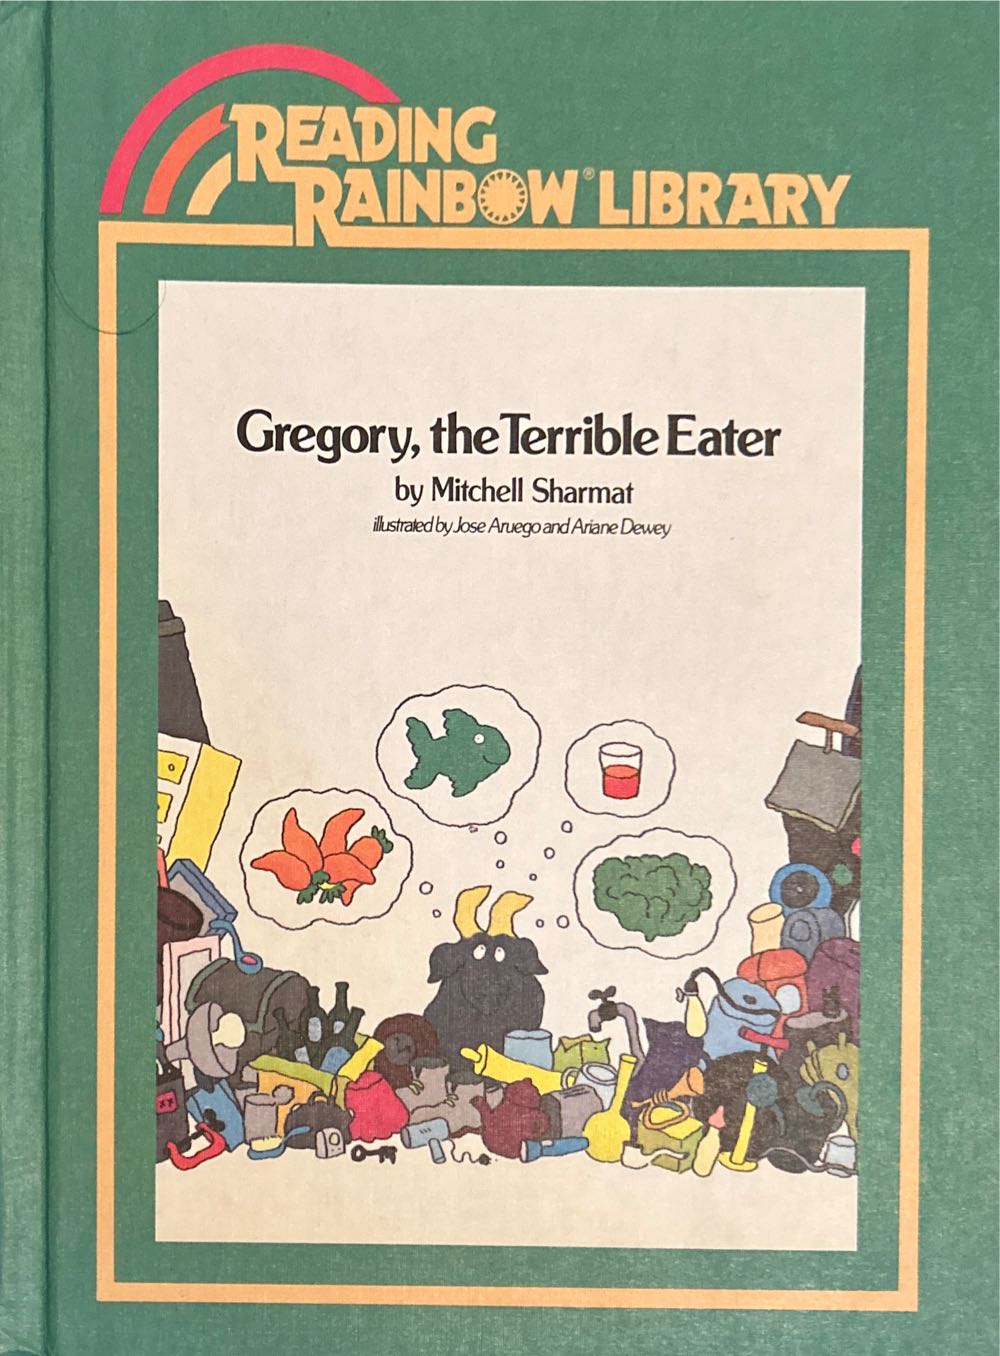 Gregory The Terrible Eater - Mitchell Sharmat book collectible - Main Image 2